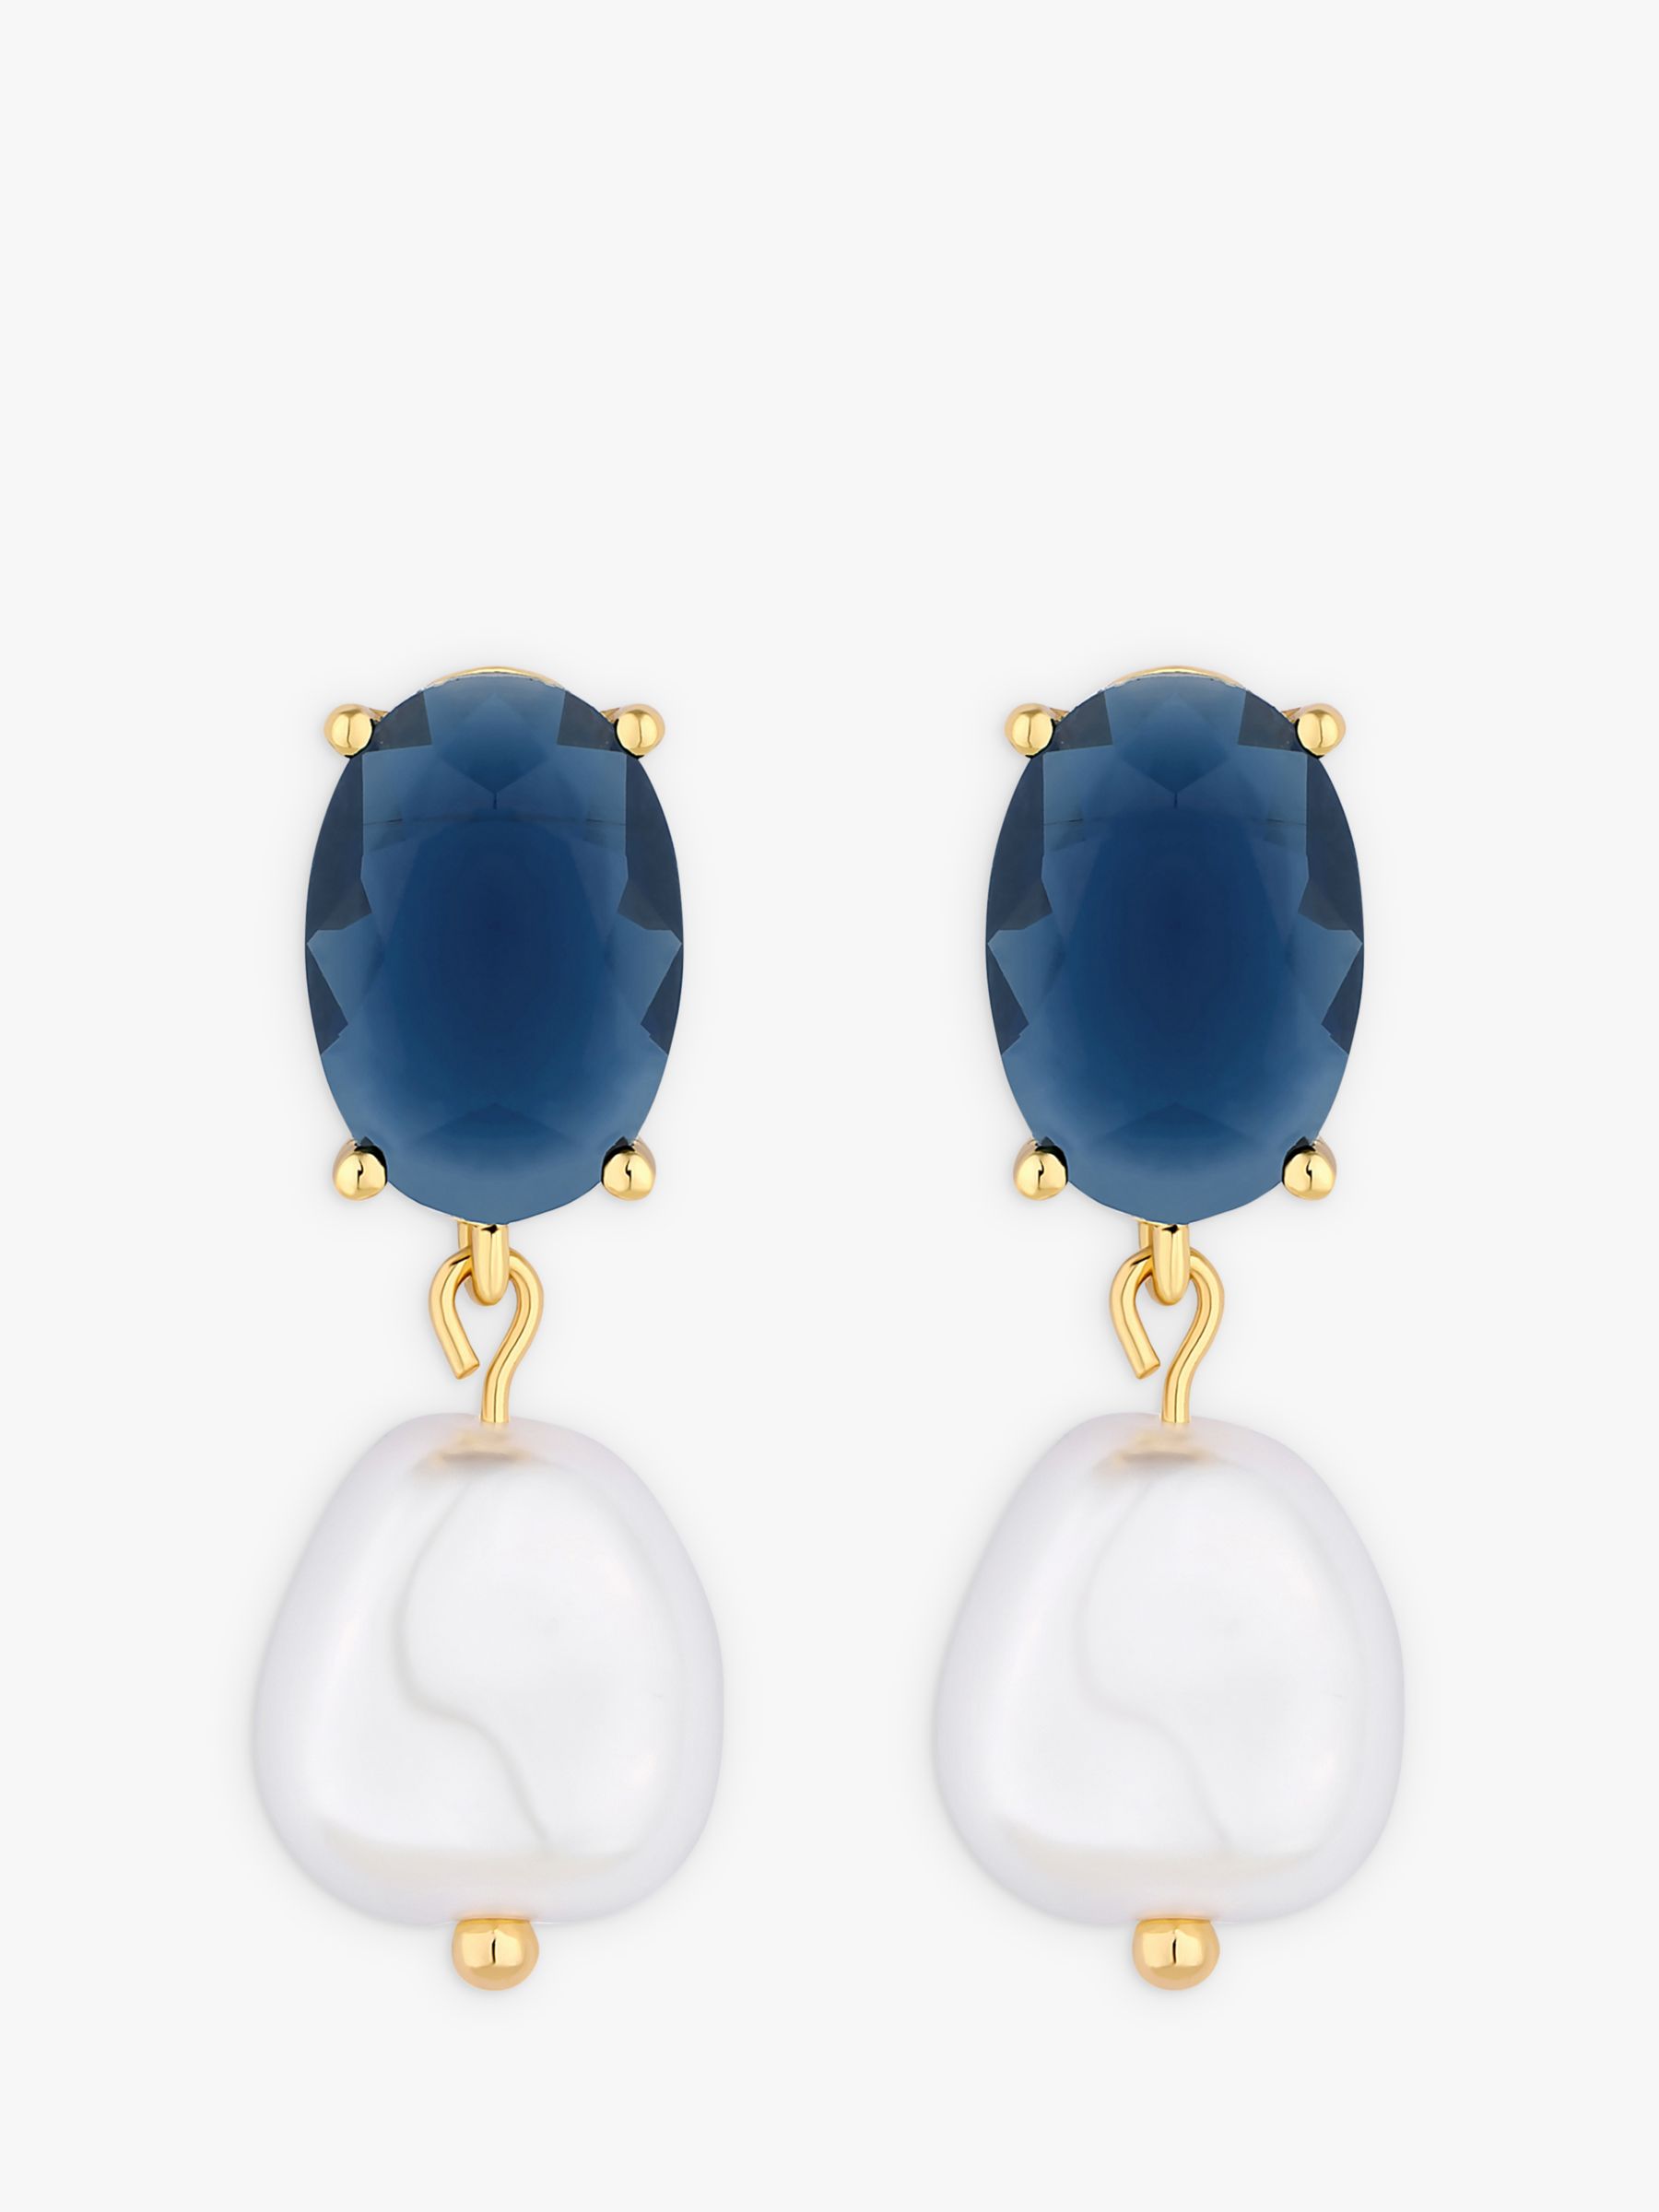 Buy Jon Richard Cubic Zirconia Blue Stone And Pearl Drop Earrings, Gold/Blue/White Online at johnlewis.com